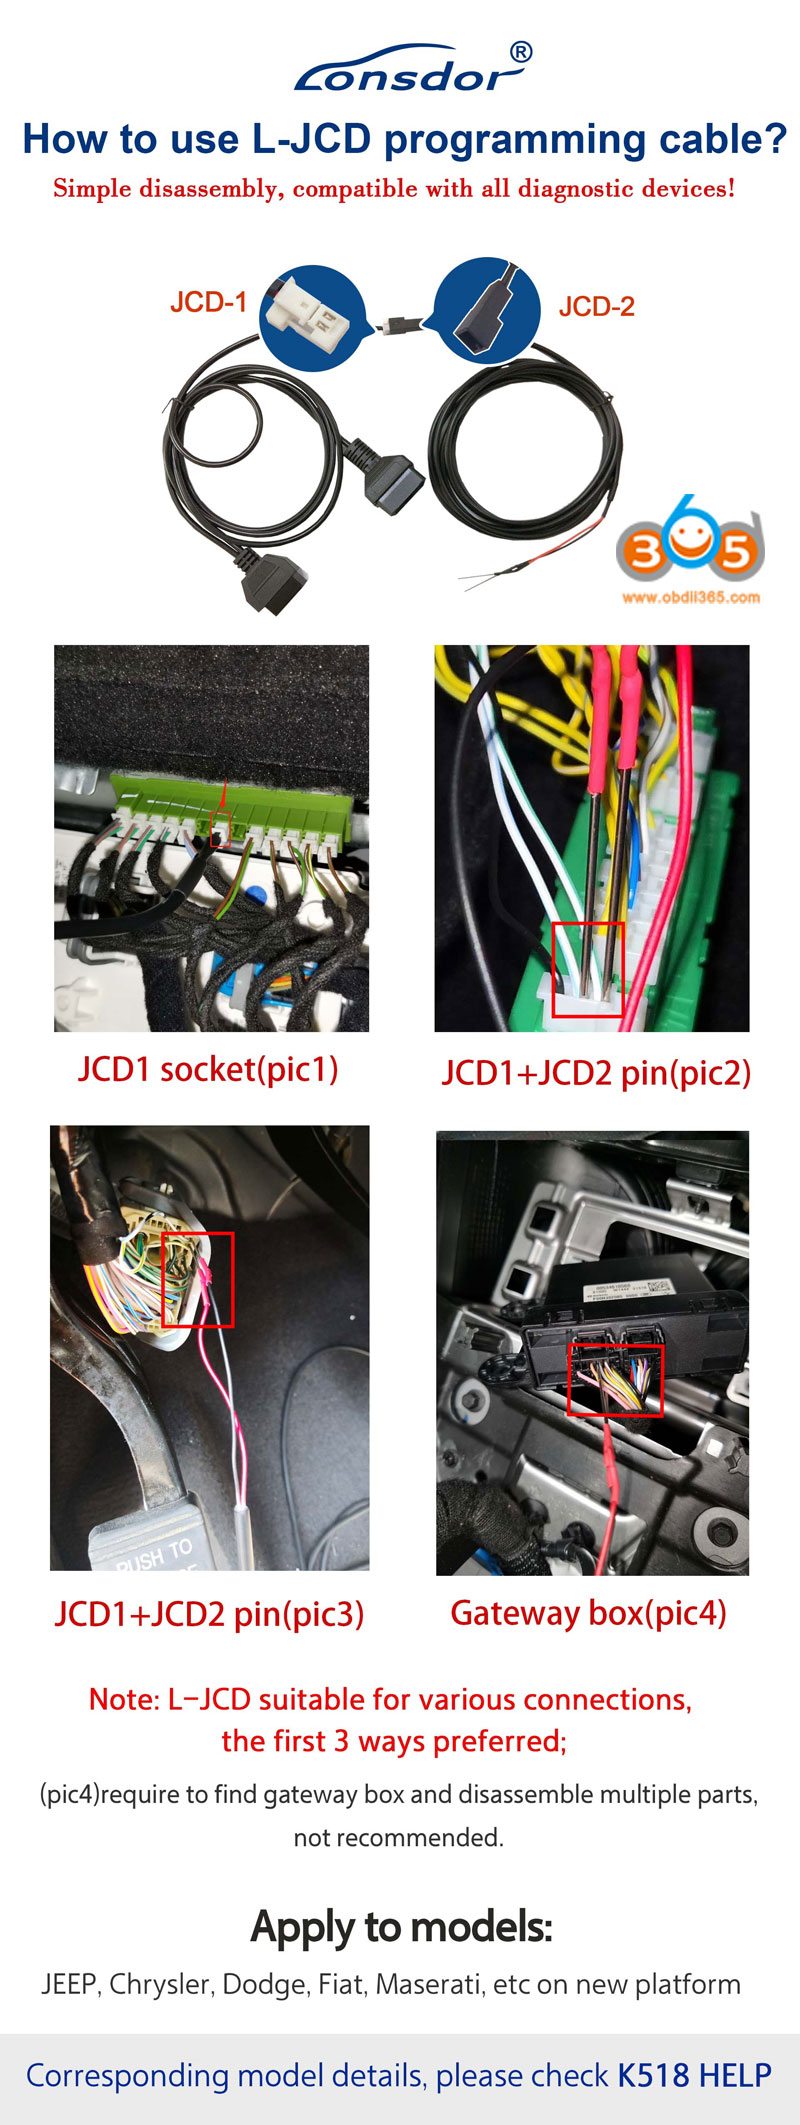 Use Lonsdor L-JCD Programming Cable for K518